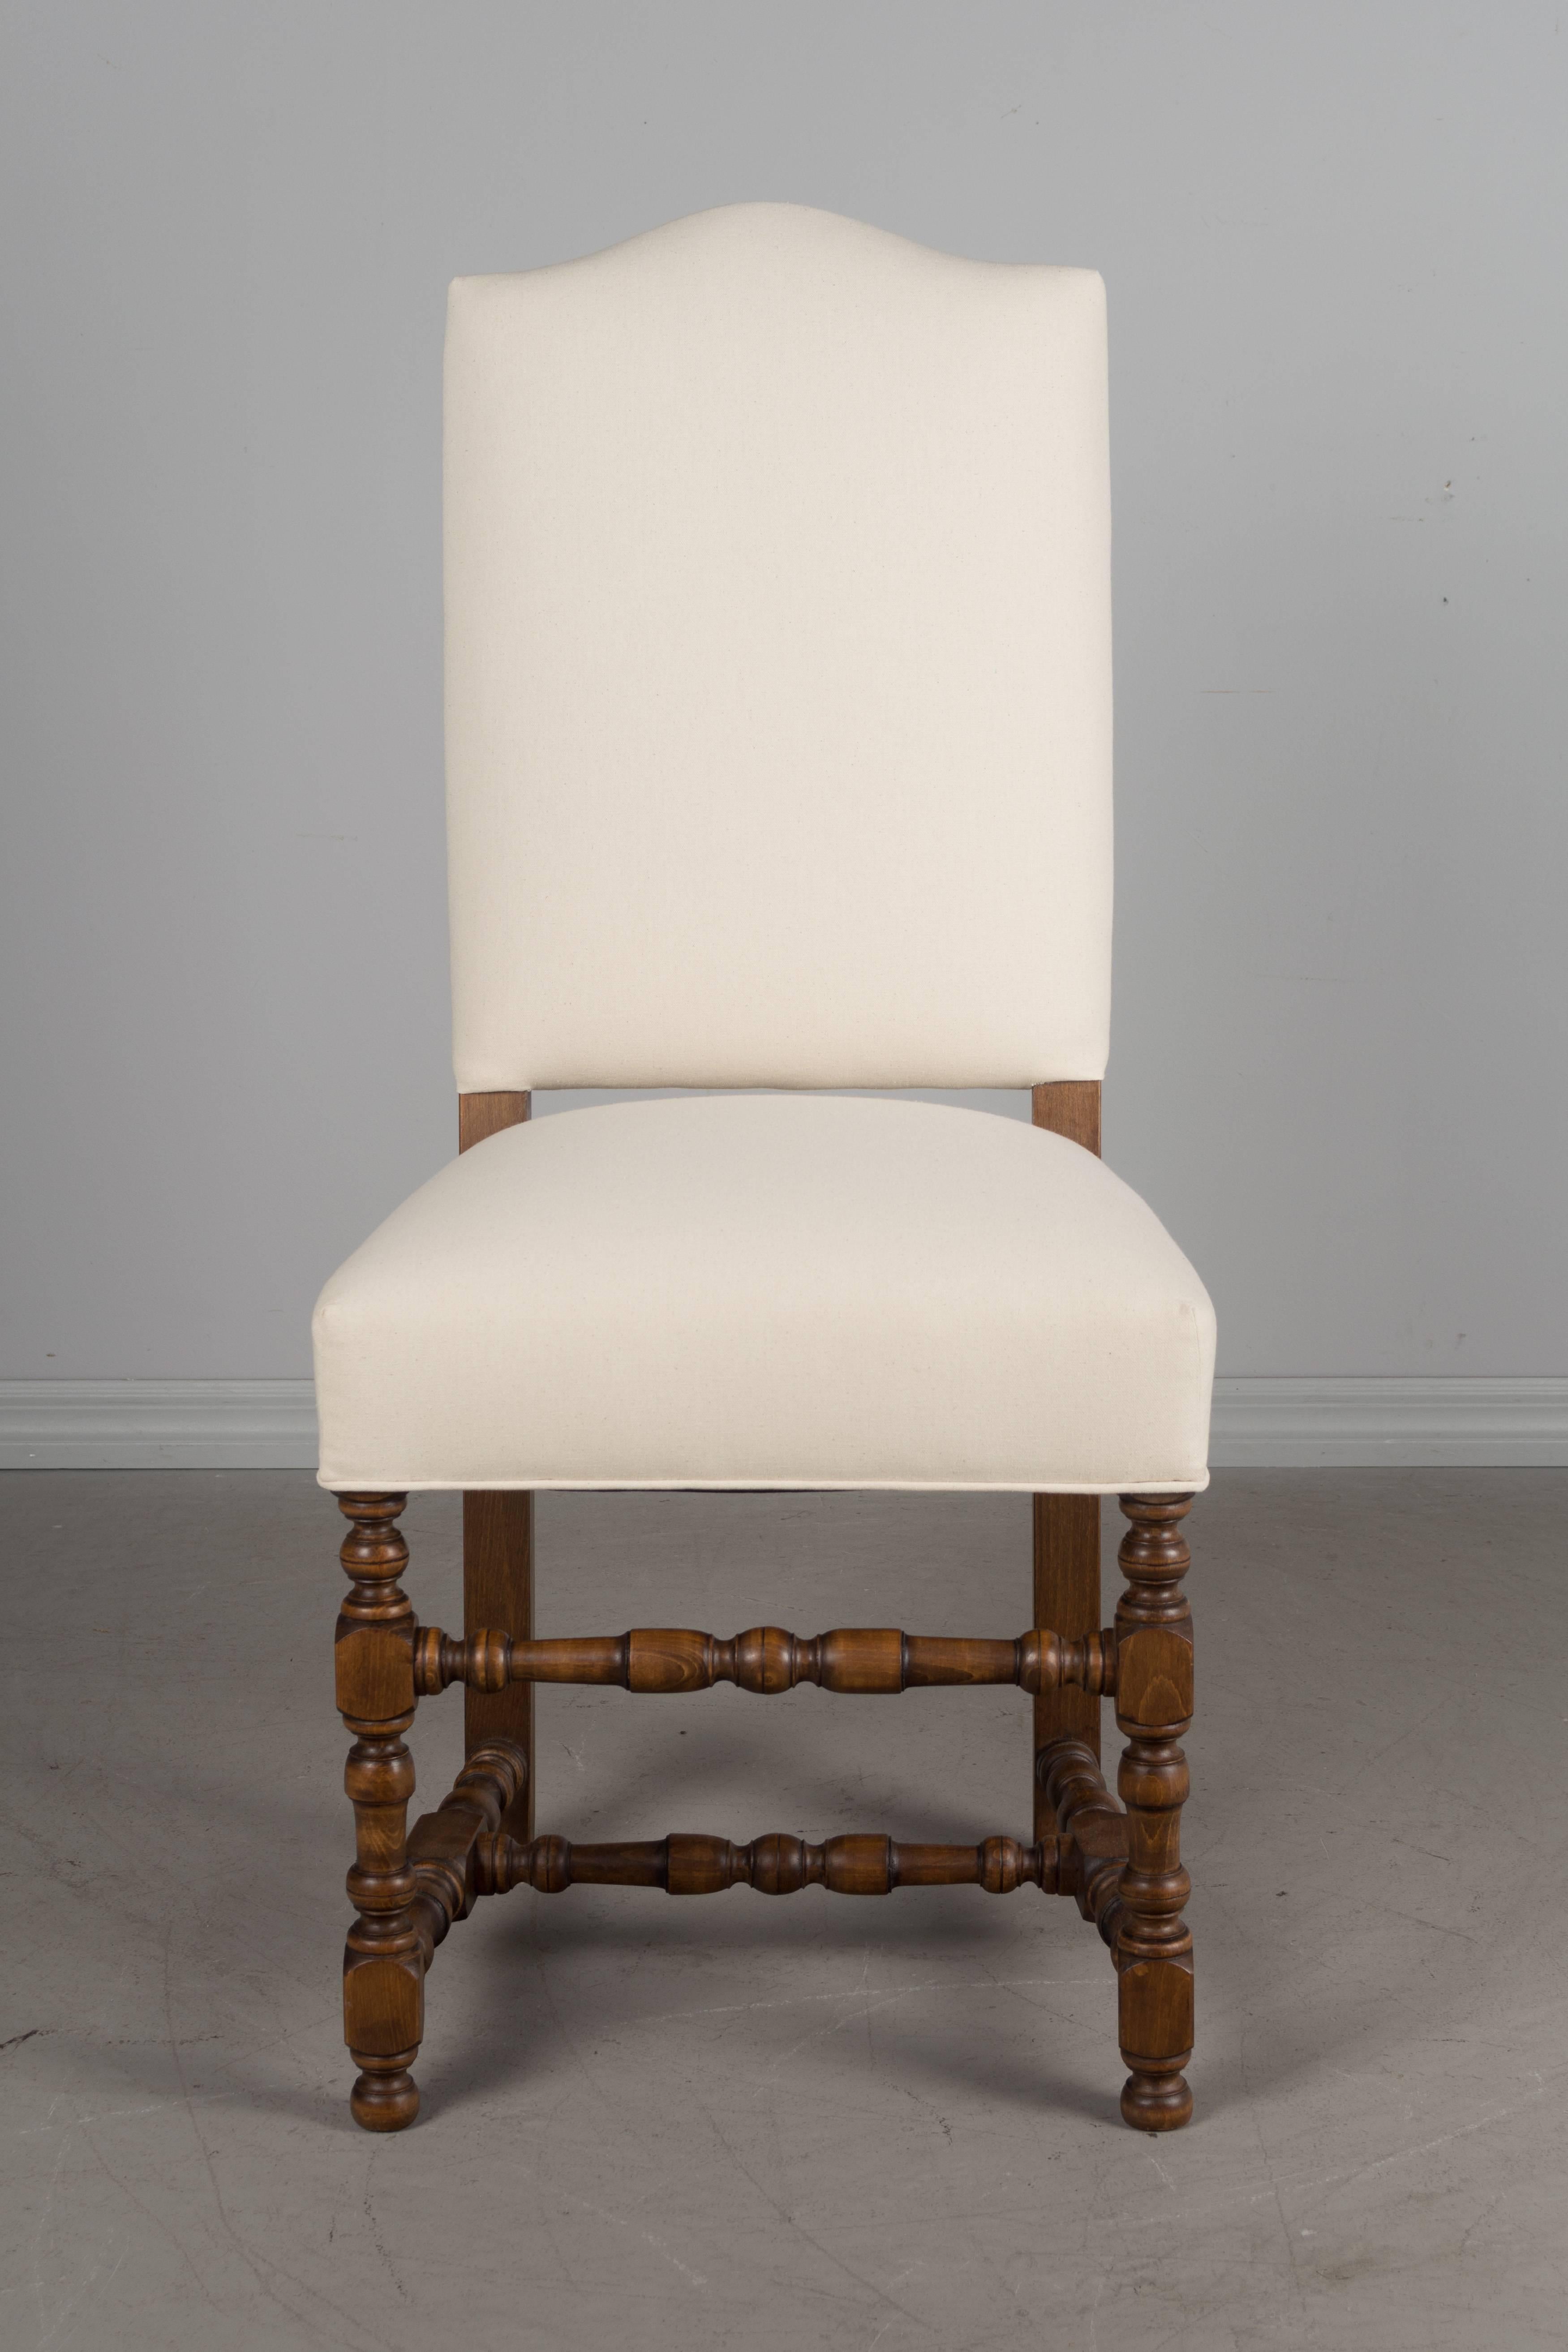 Set of eight elegant French Louis XIII style dining chairs made of beechwood with graceful camelback, turned wood legs and stretcher. Newly reupholstered in natural canvas fabric. Sturdy and comfortable seating.